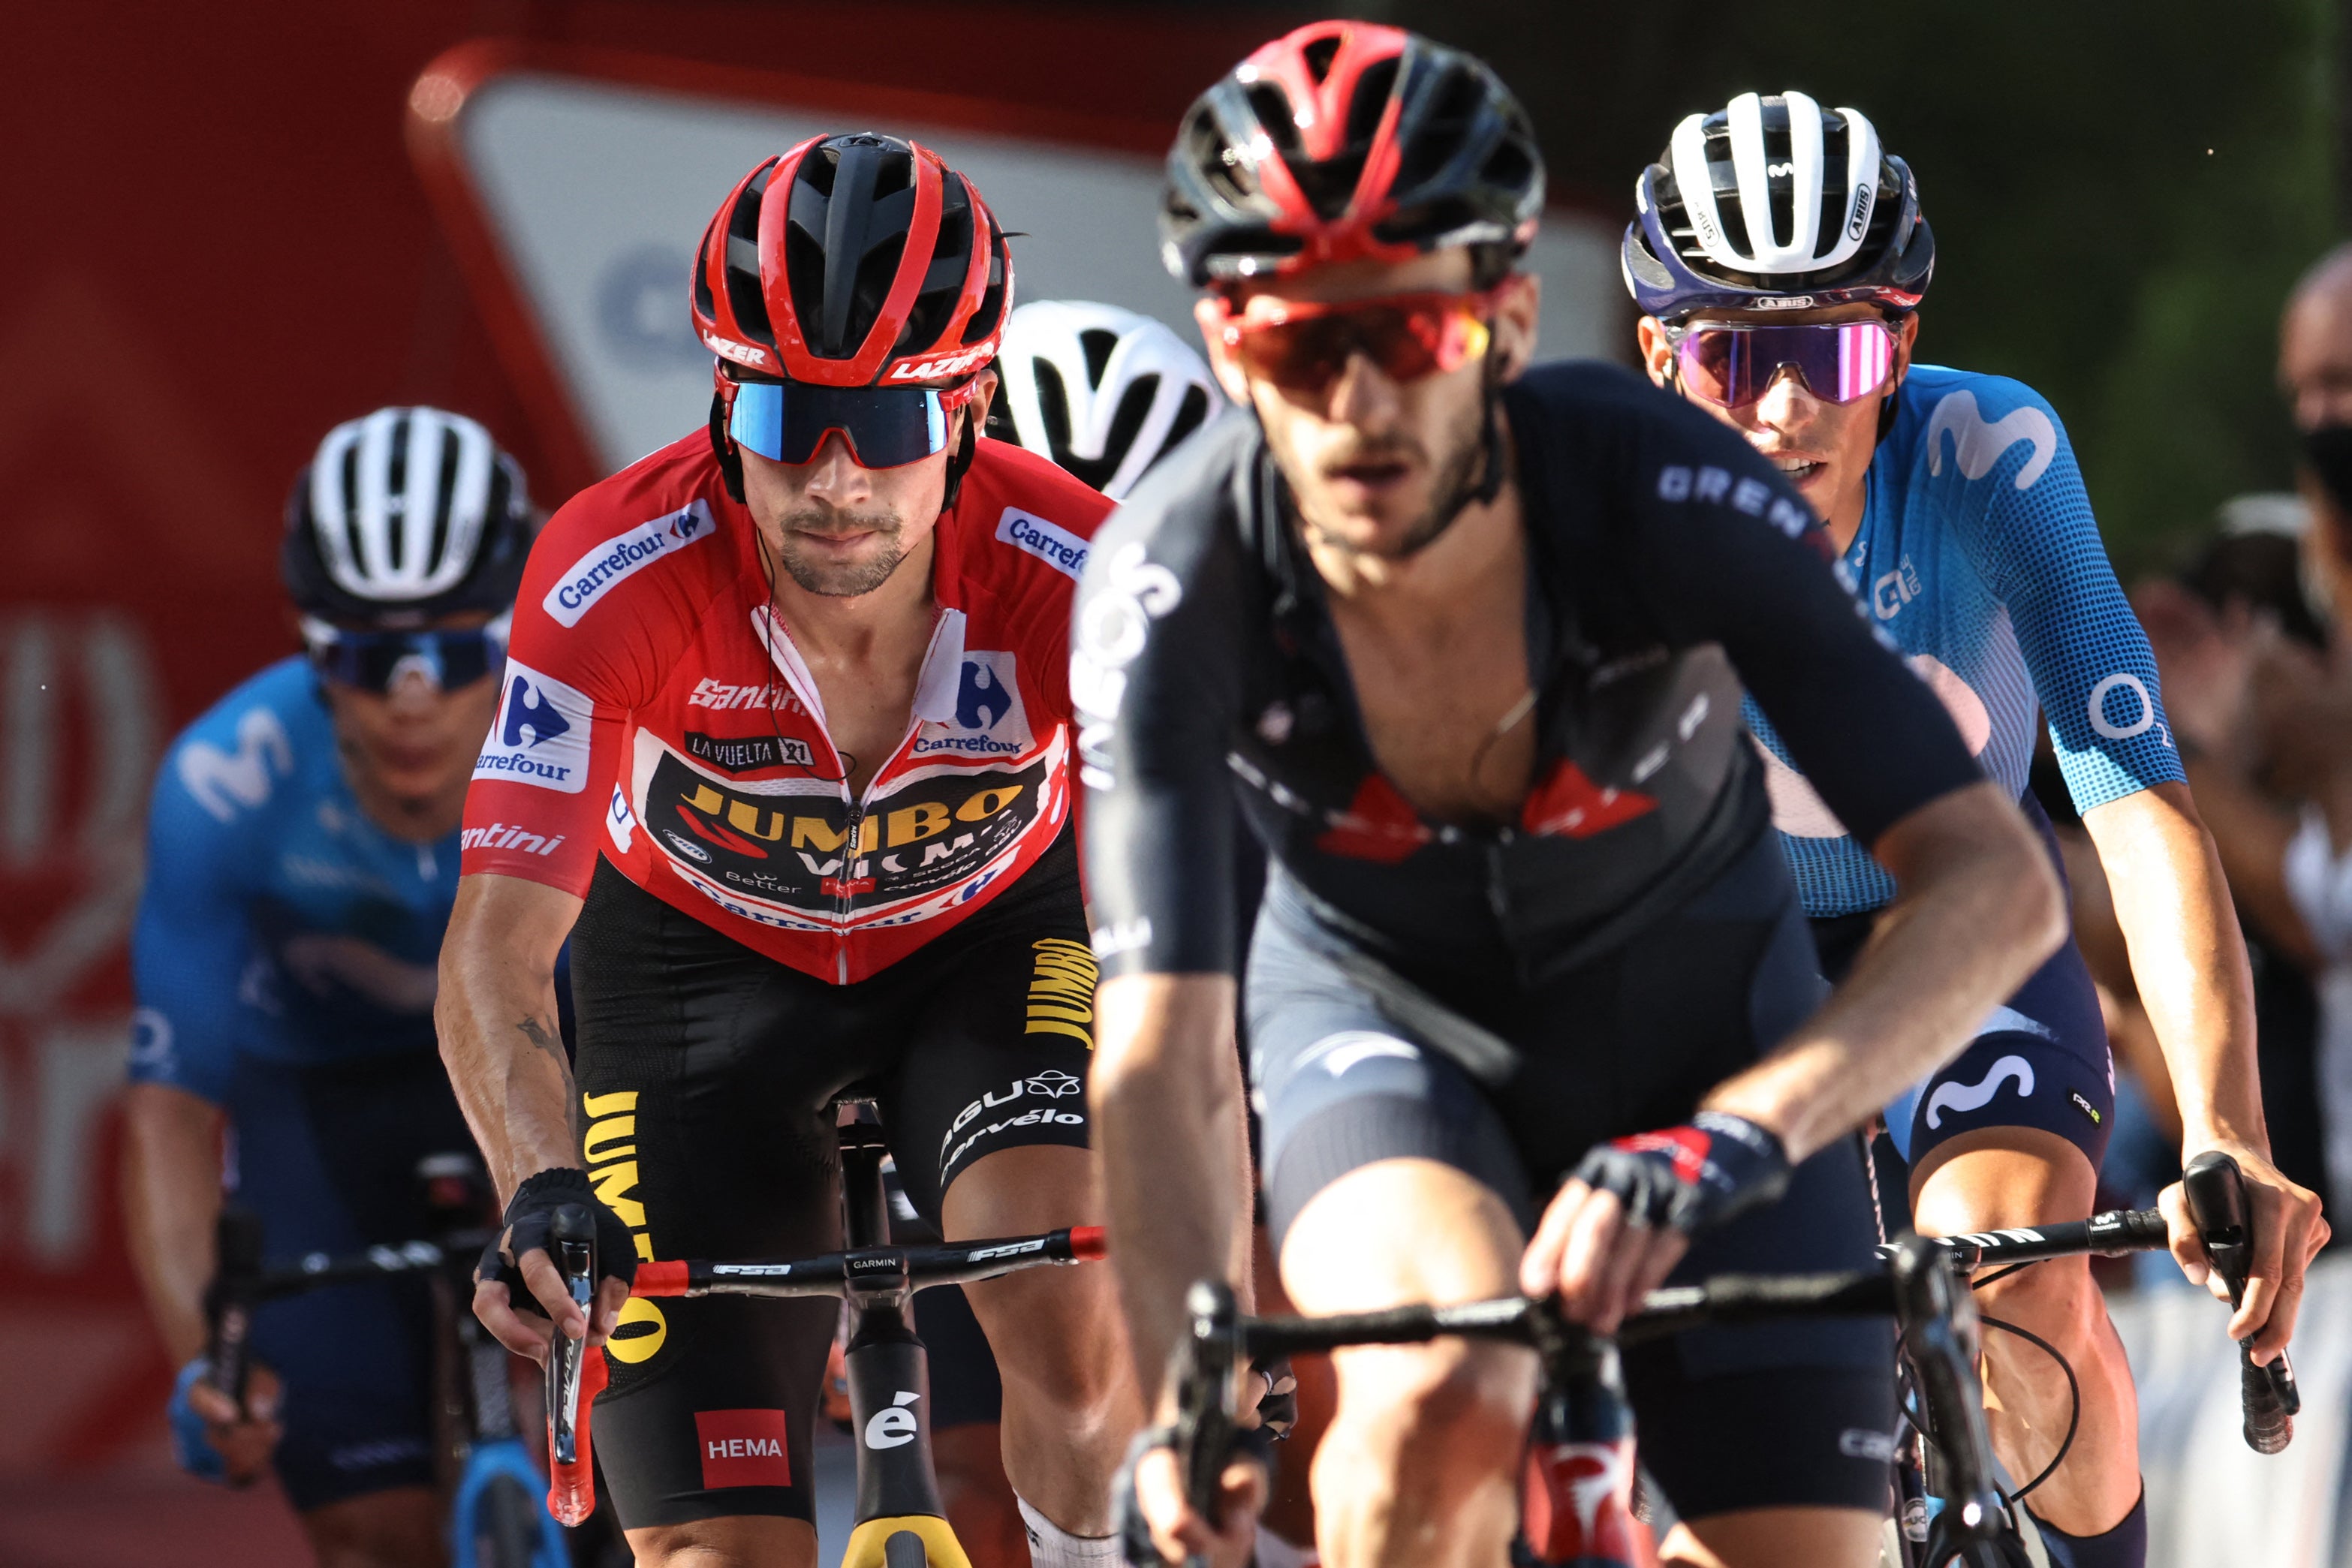 Adam Yates led the group of favourites up the Balcon de Alicante on Stage 7